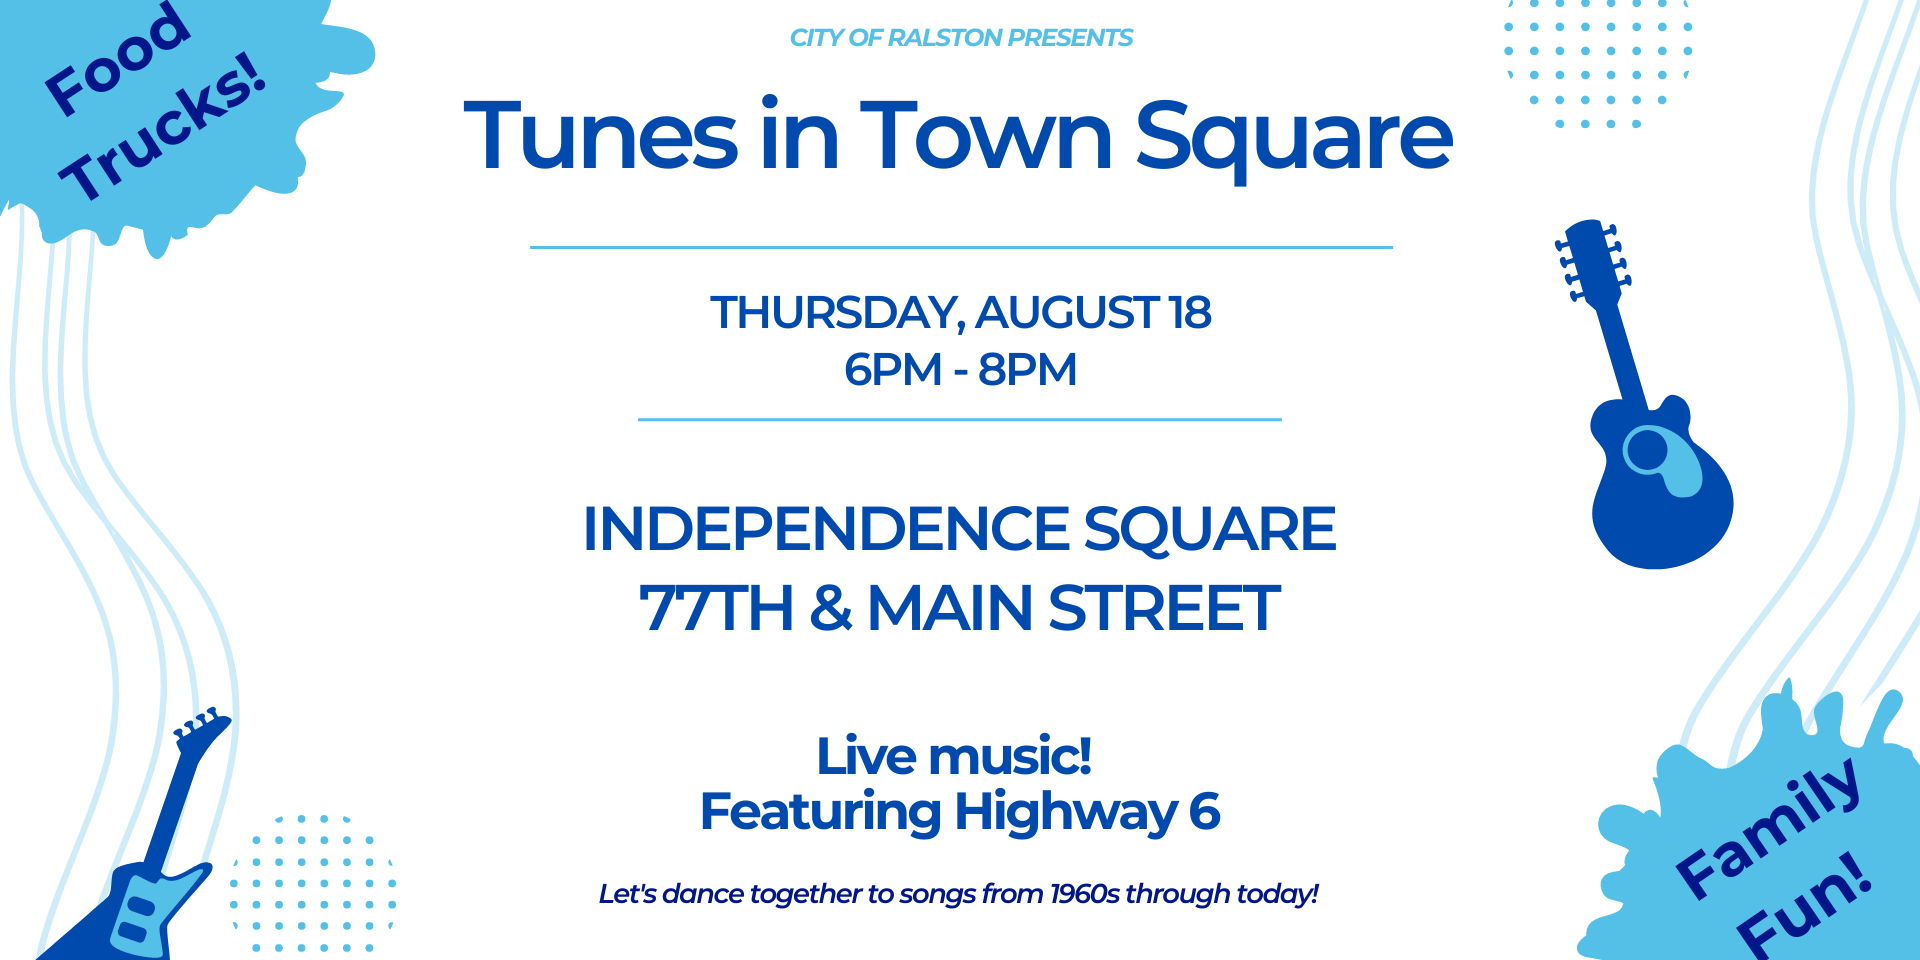 Tunes in Town Square promotional image